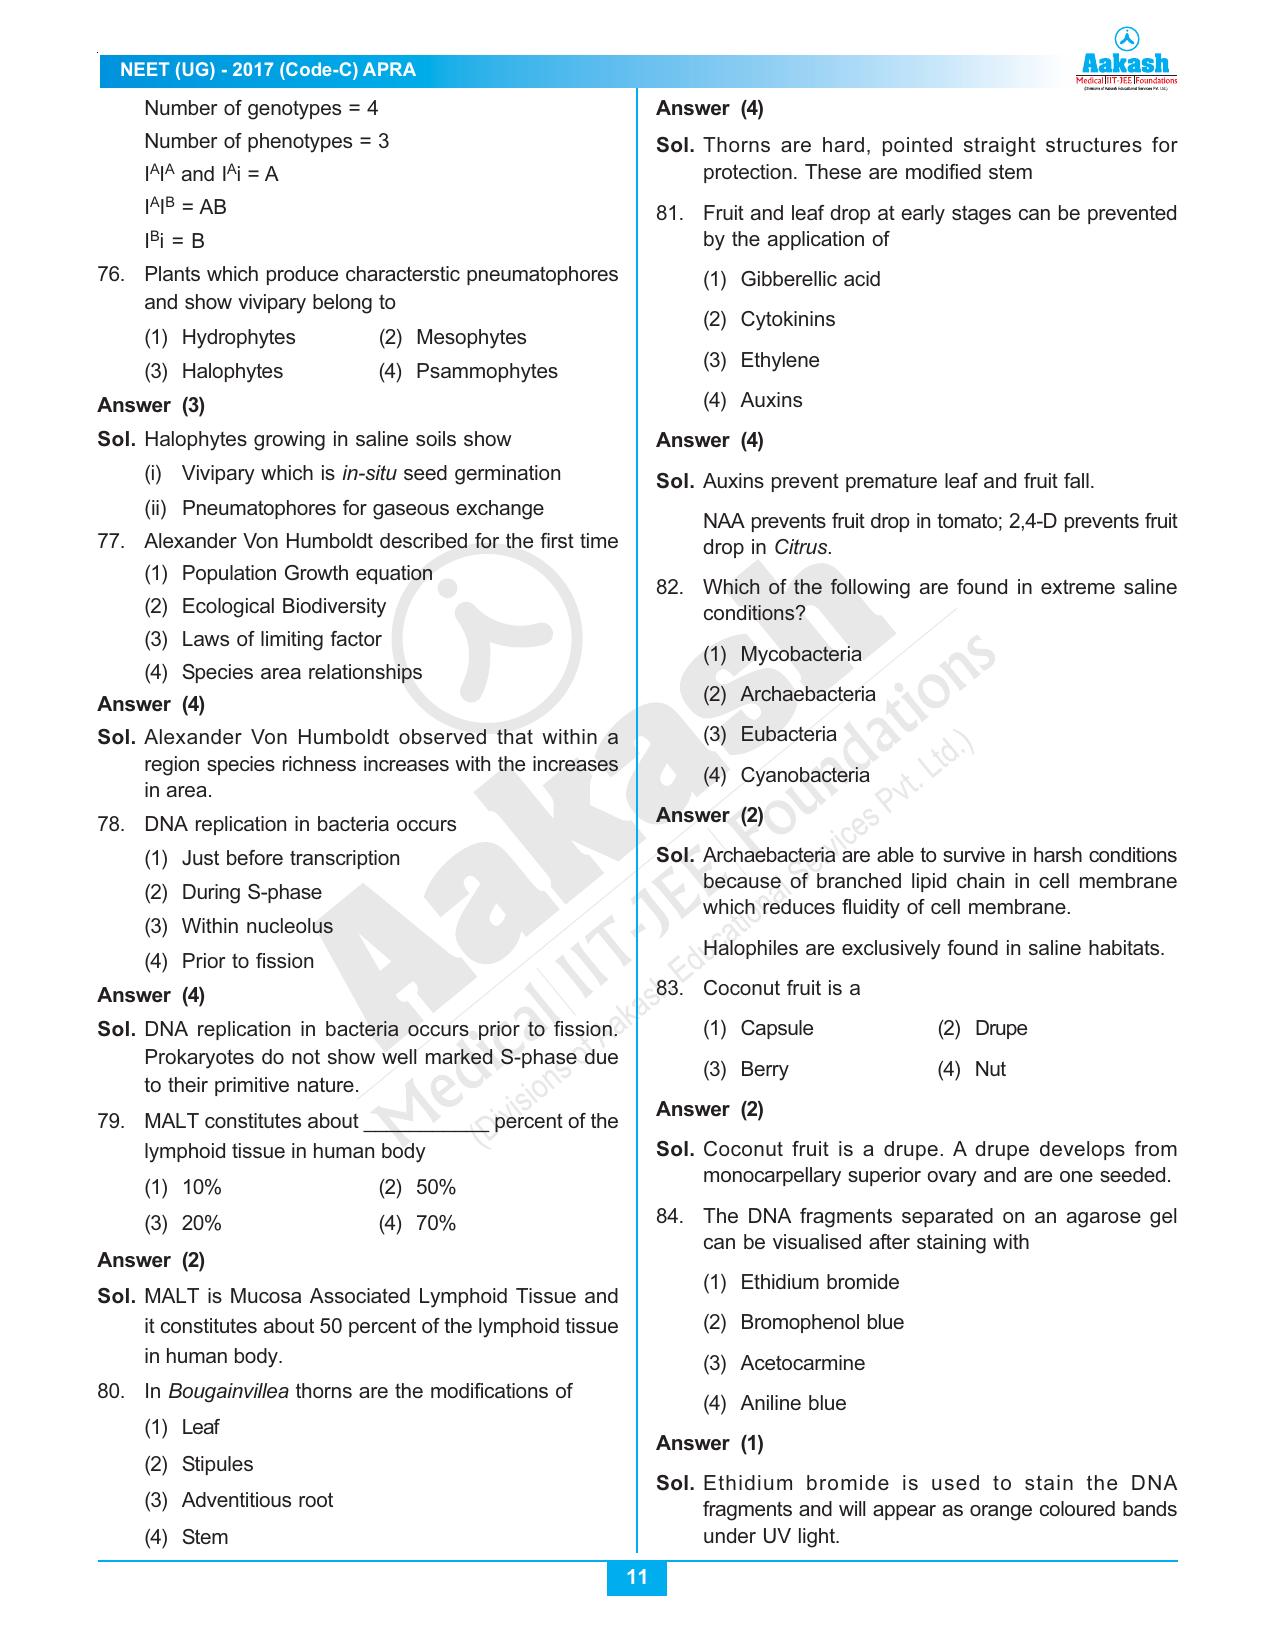  NEET Code C 2017 Answer & Solutions - Page 11